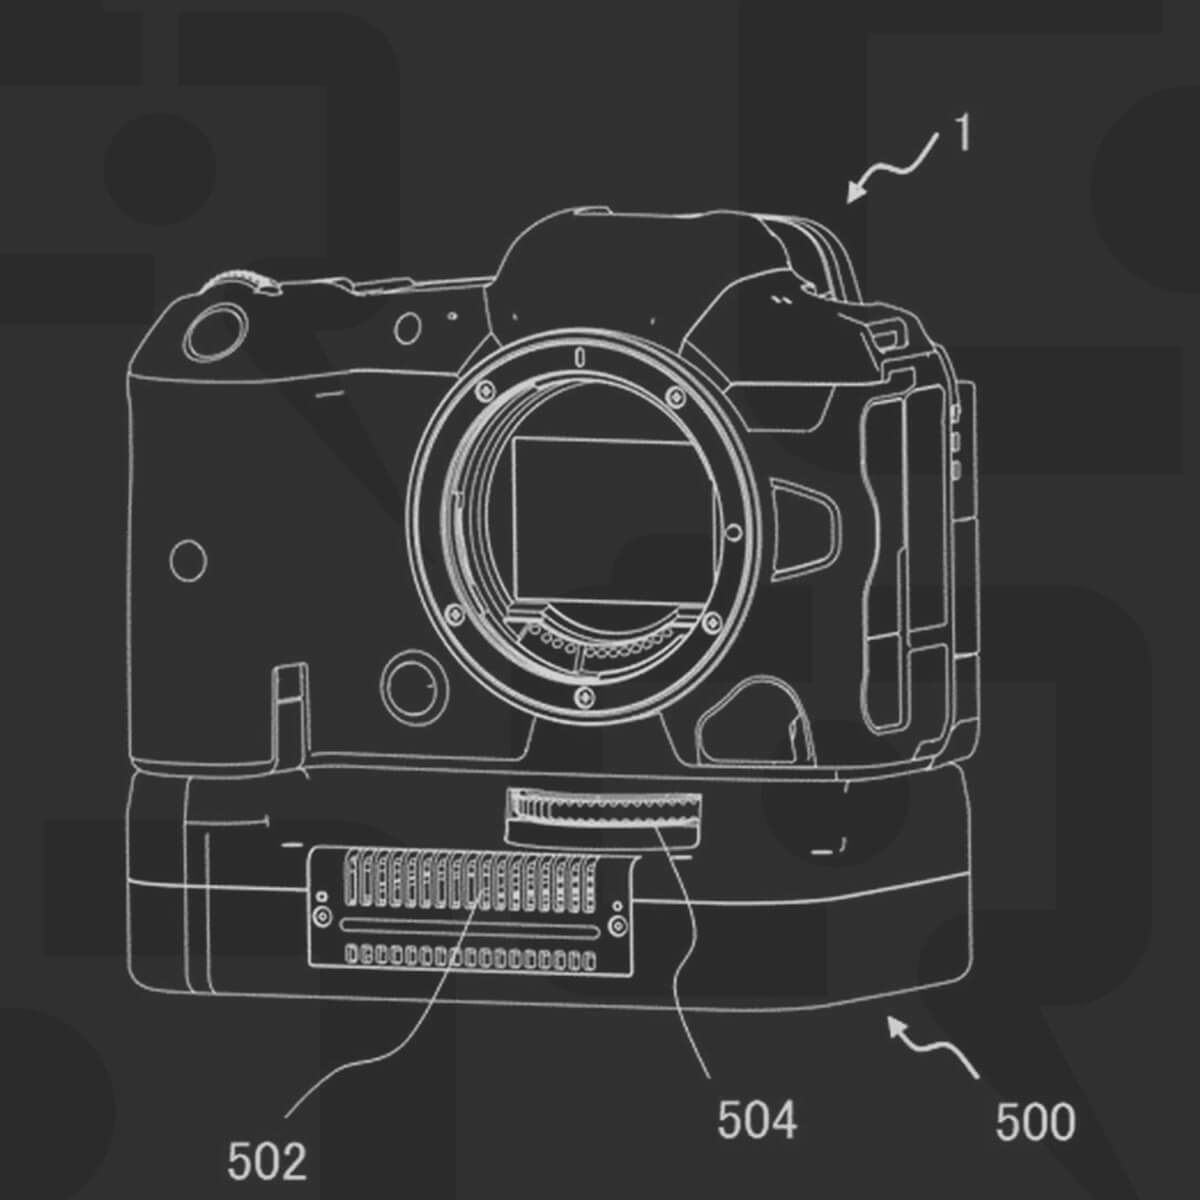 2022030864 02 - The latest patent suggests Canon will be bringing an active cooling grip for EOS R cameras